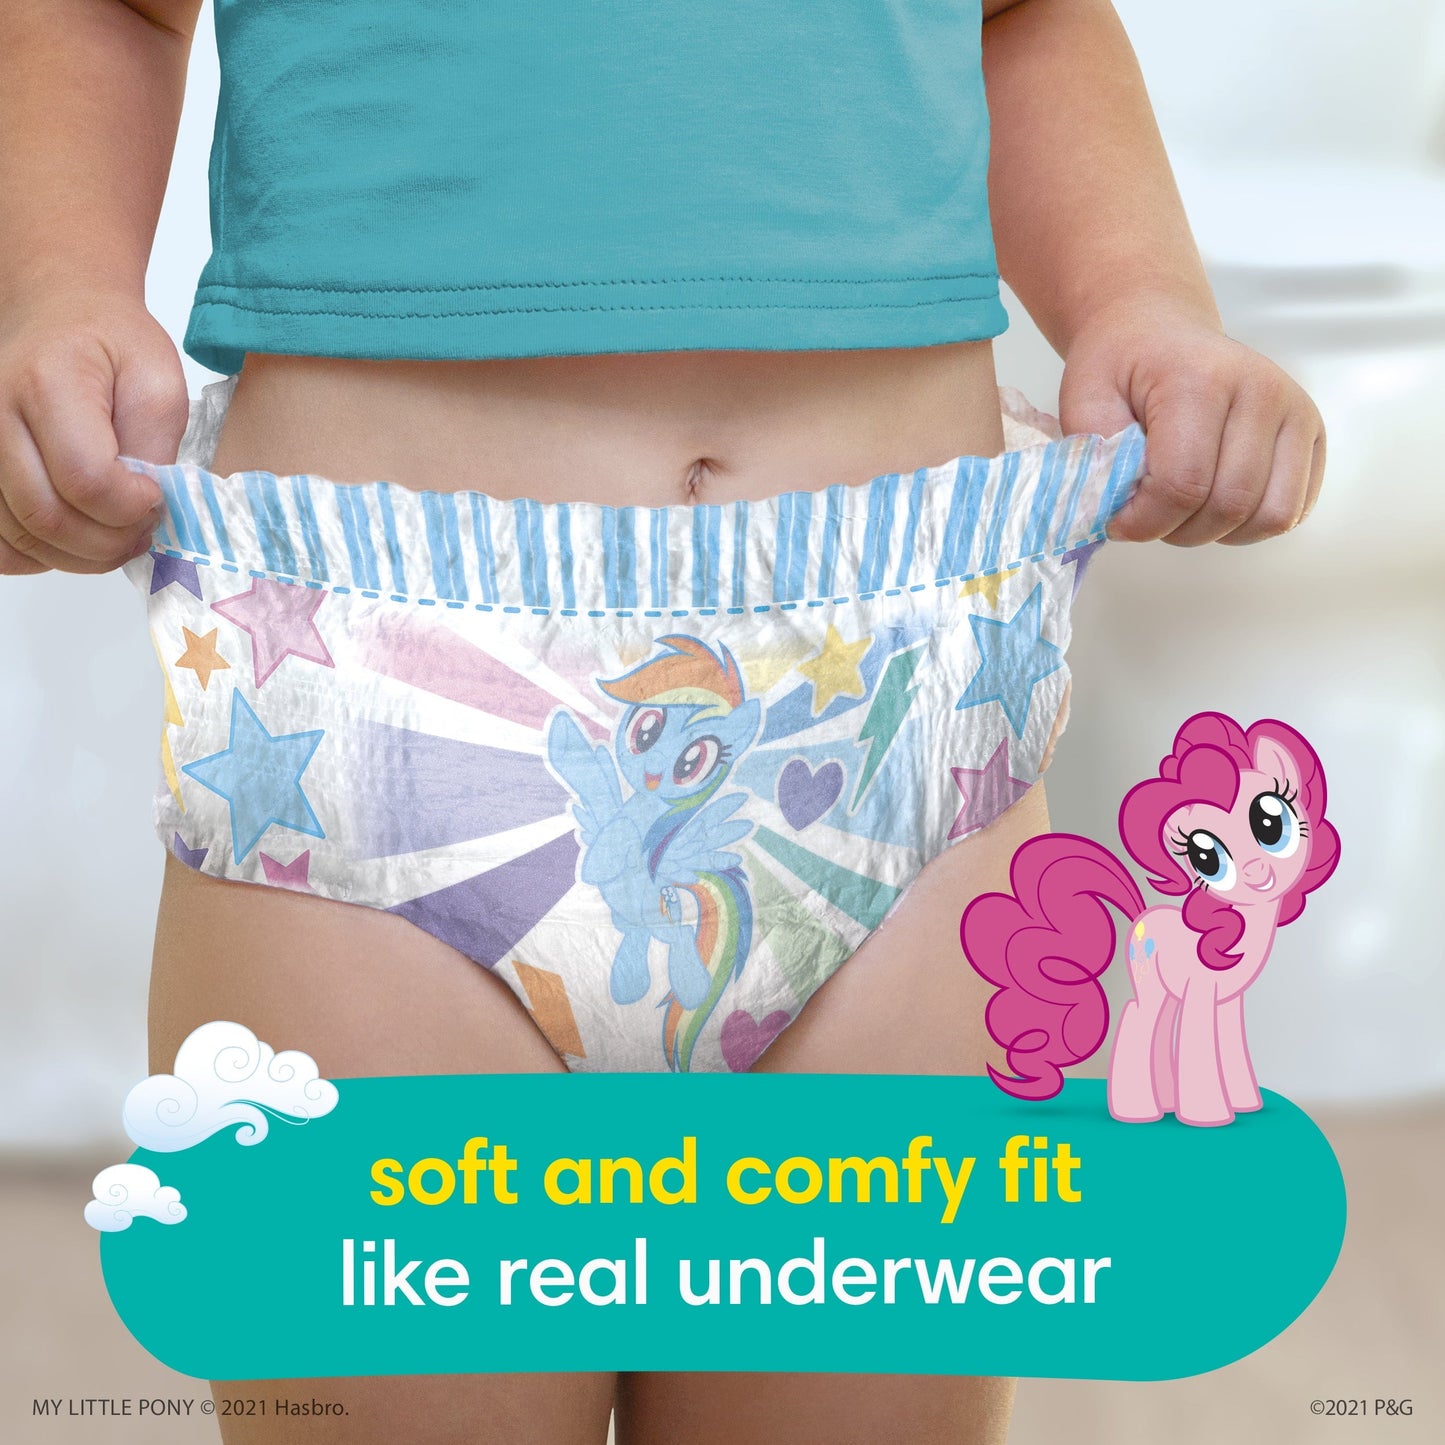 Pampers Easy Ups My Little Pony Training Pants Toddler Girls 3T/4T 76 Ct